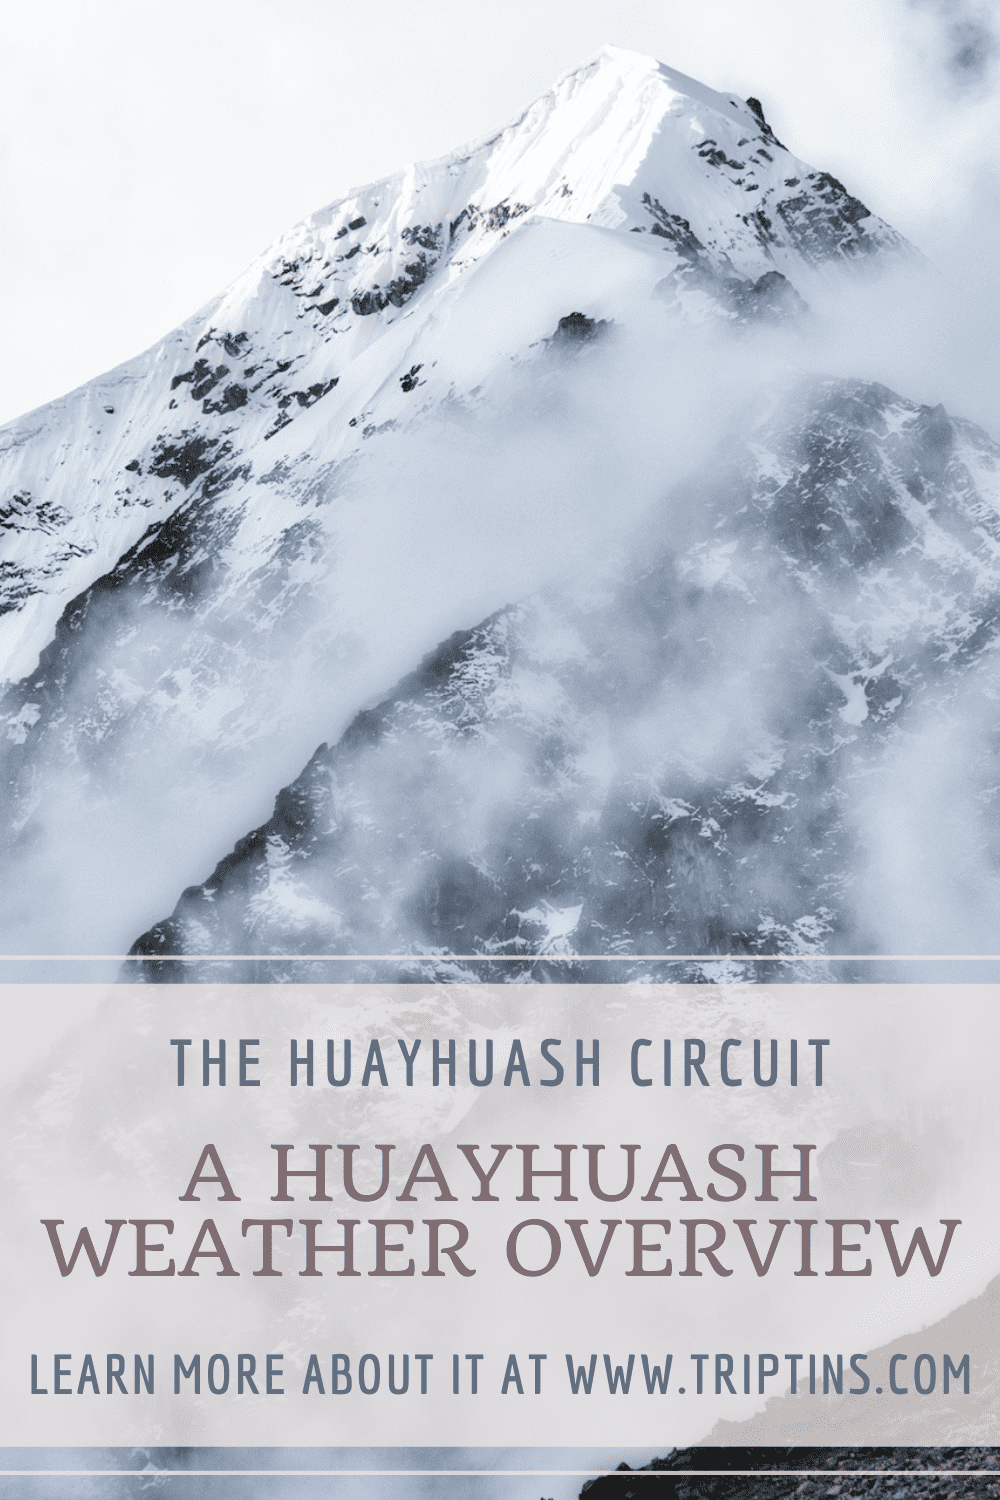 Best Time for a Huayhuash Trek